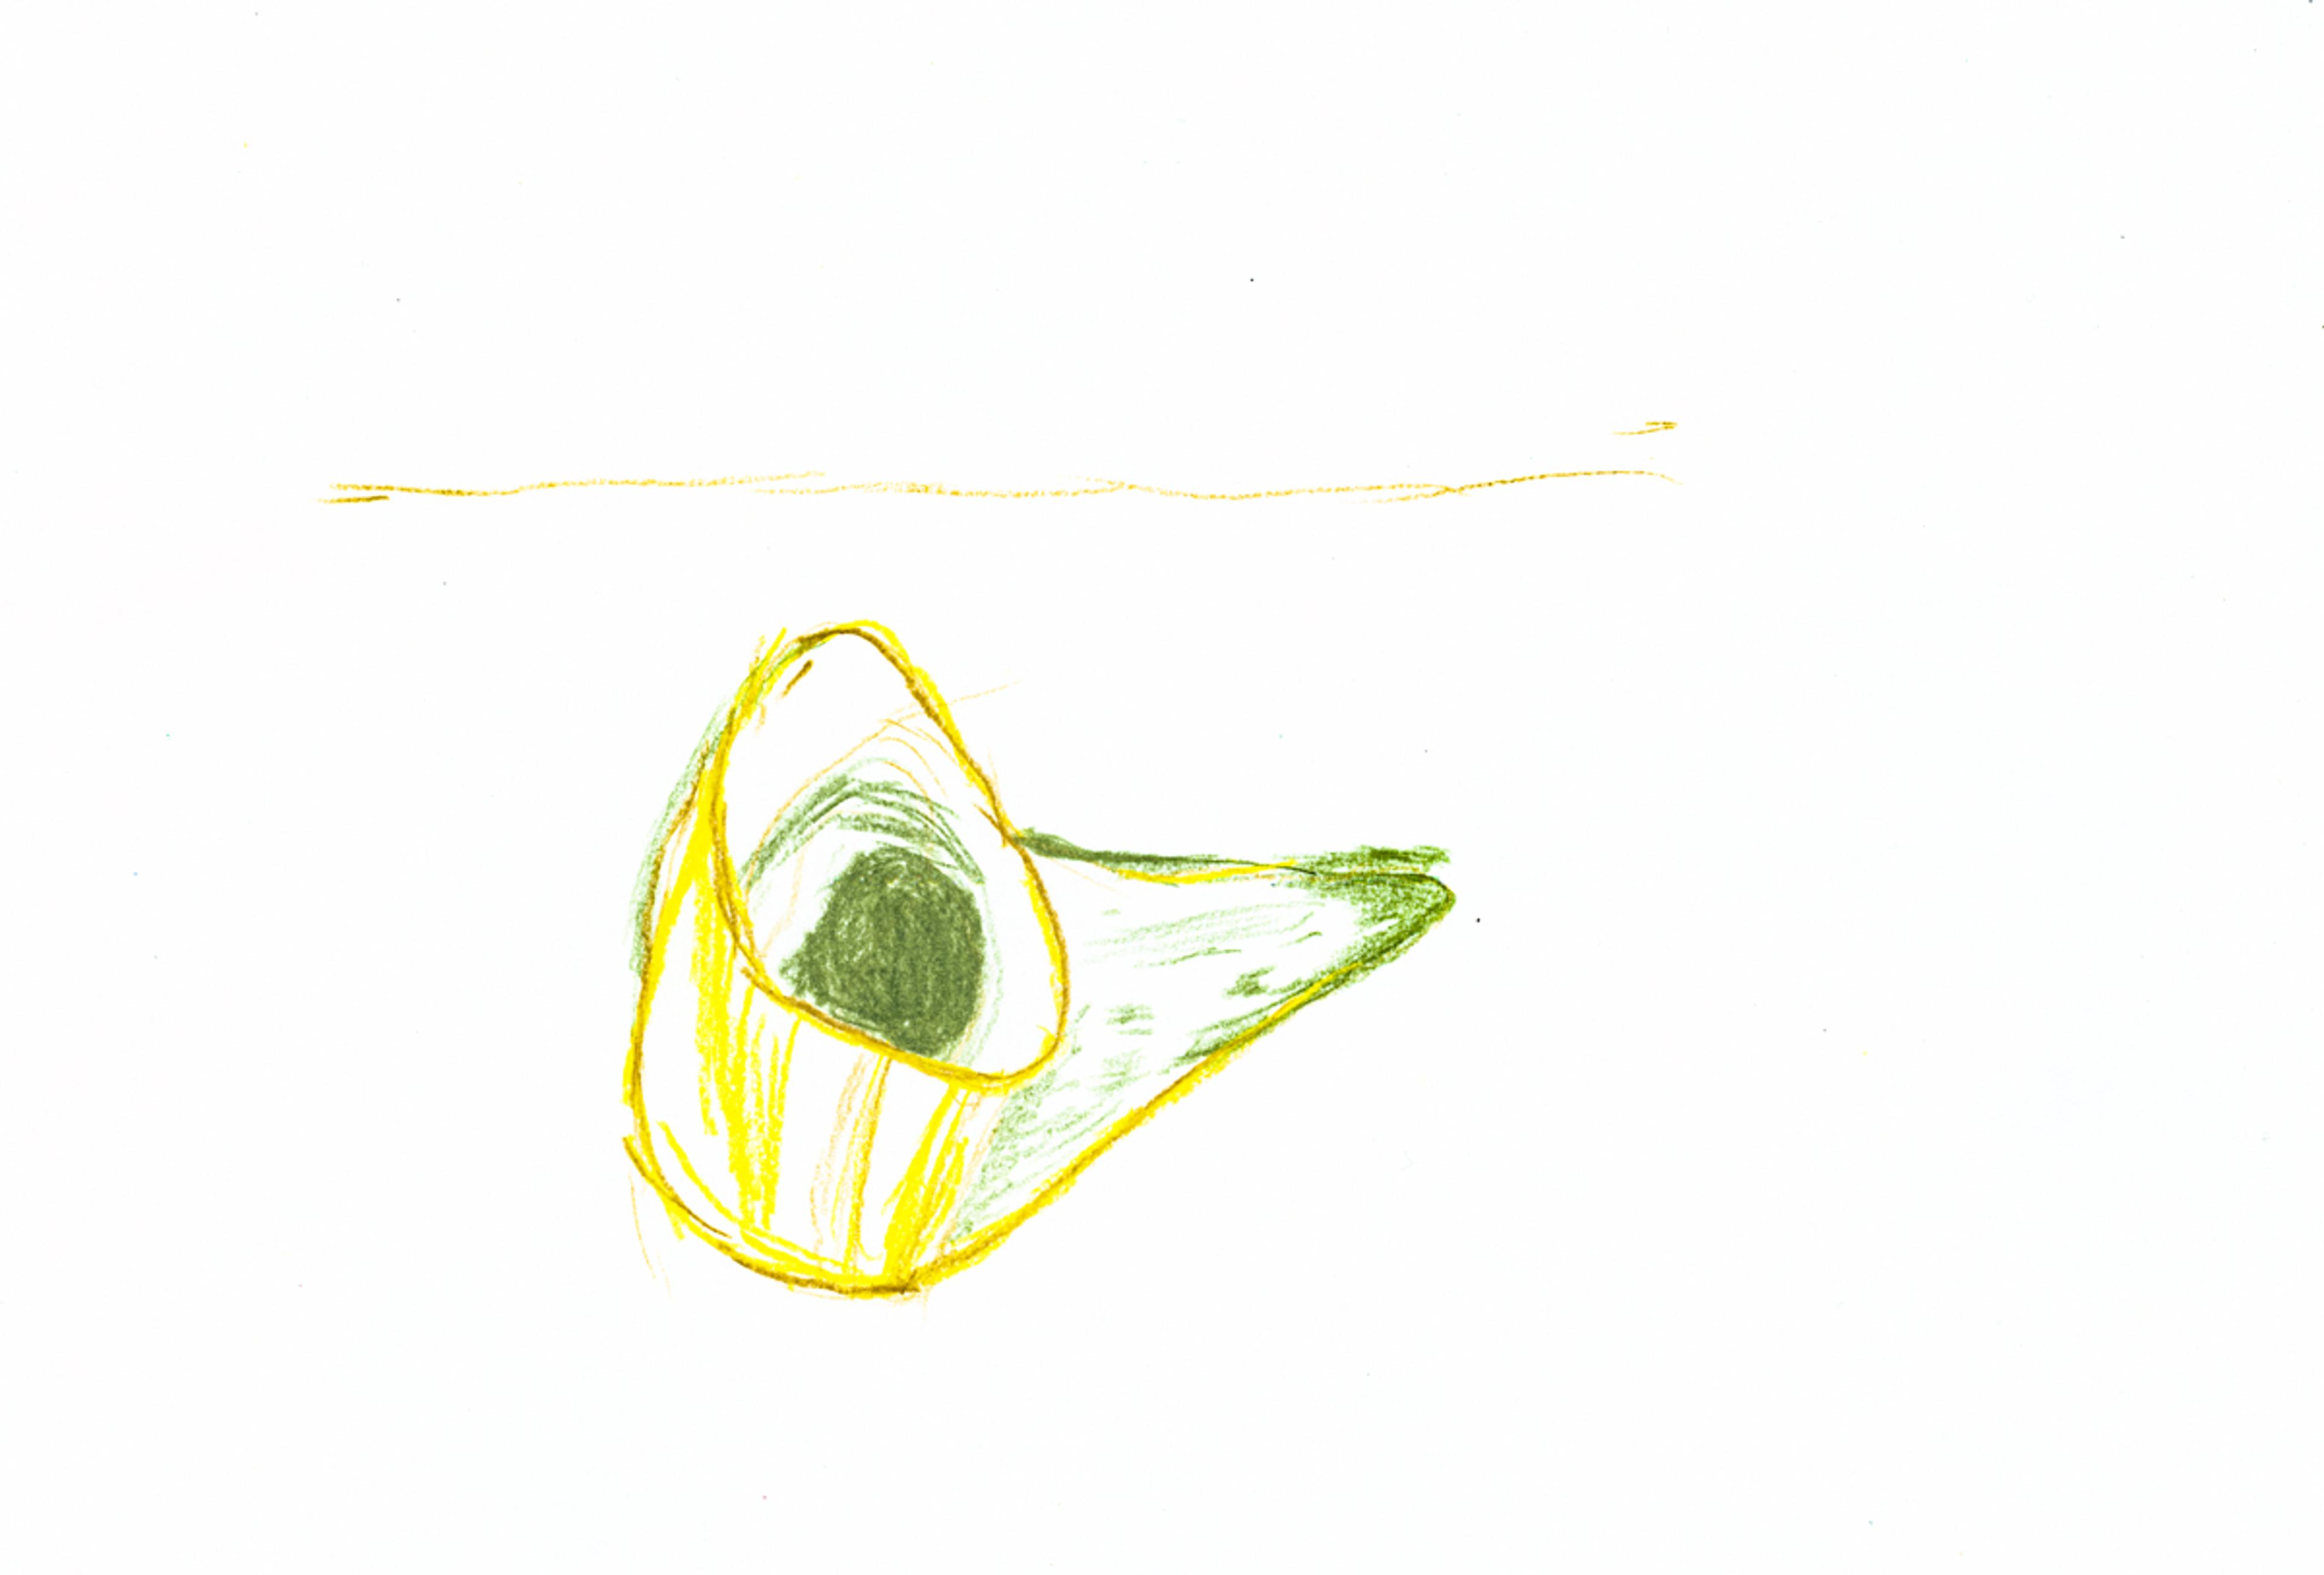 green and yellow pencil drawing of a cow's horn